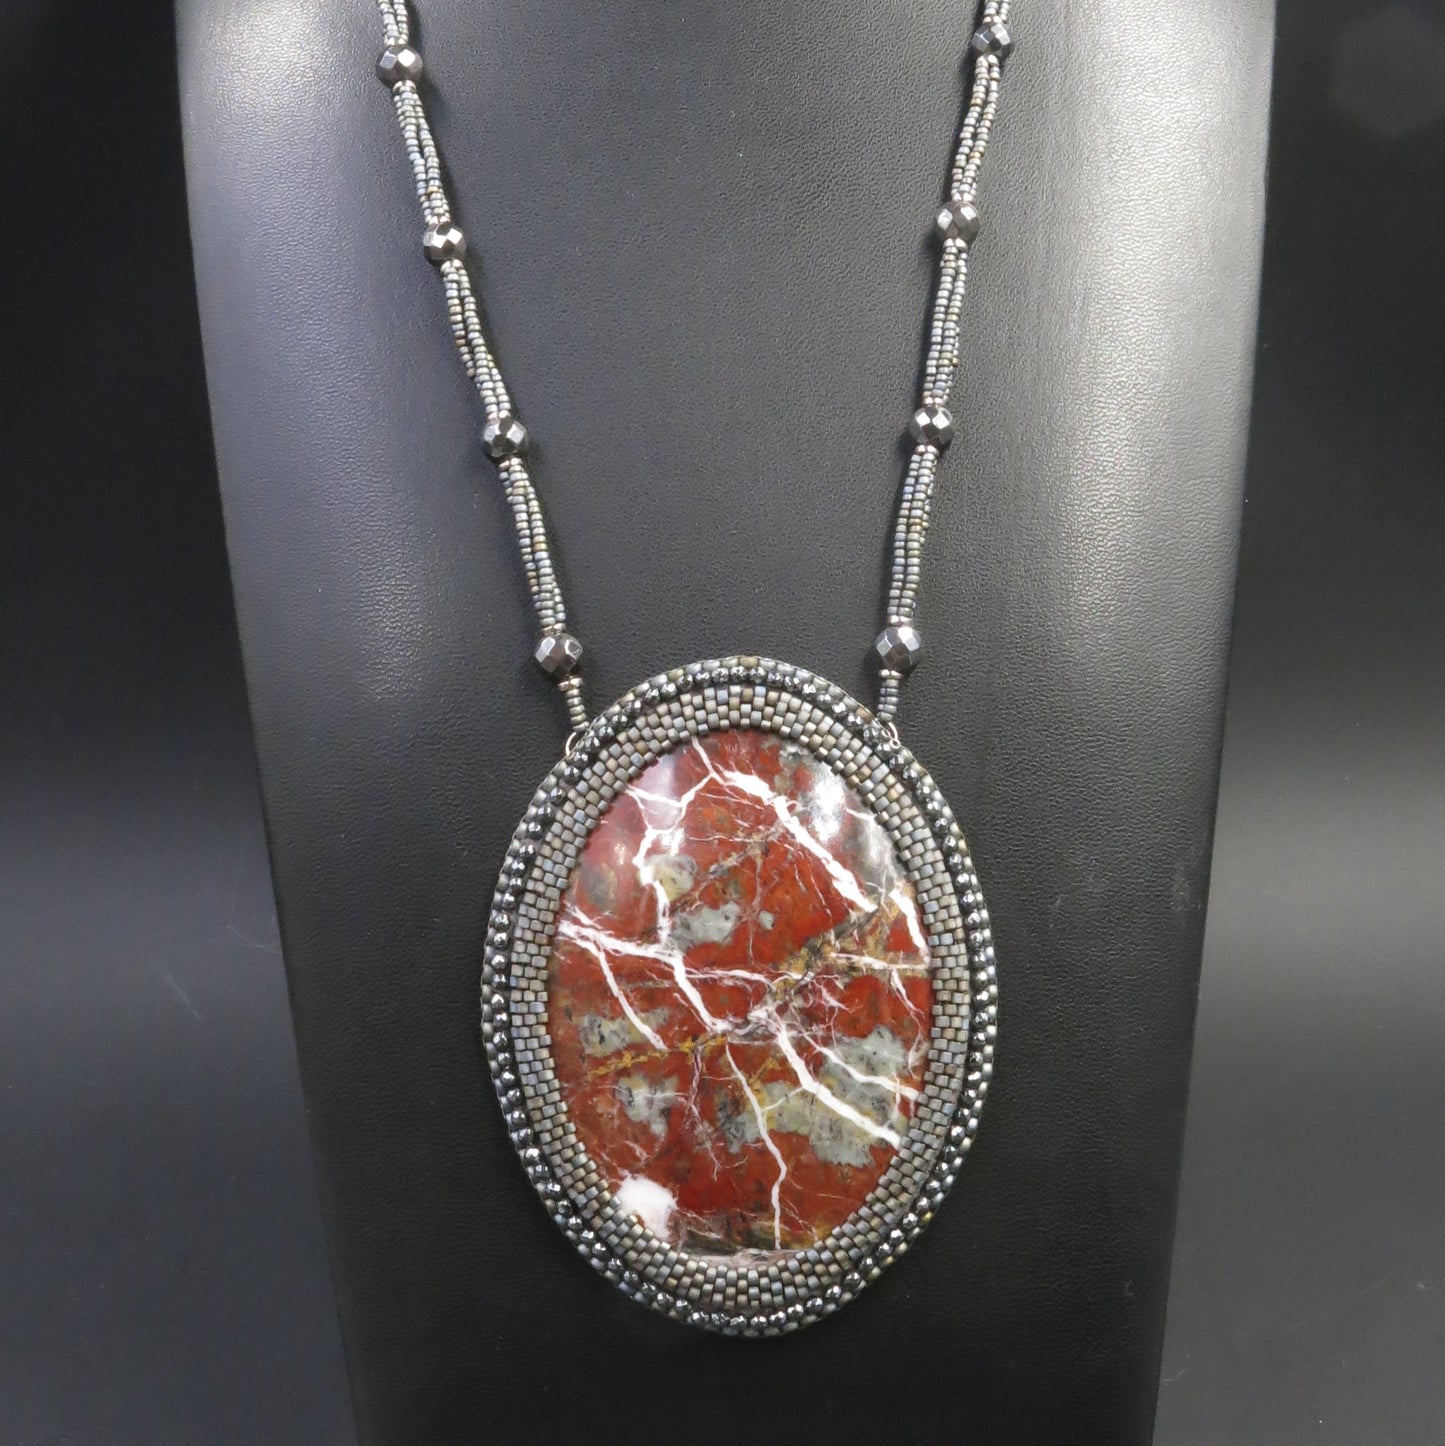 Embroidered necklace with red jasper